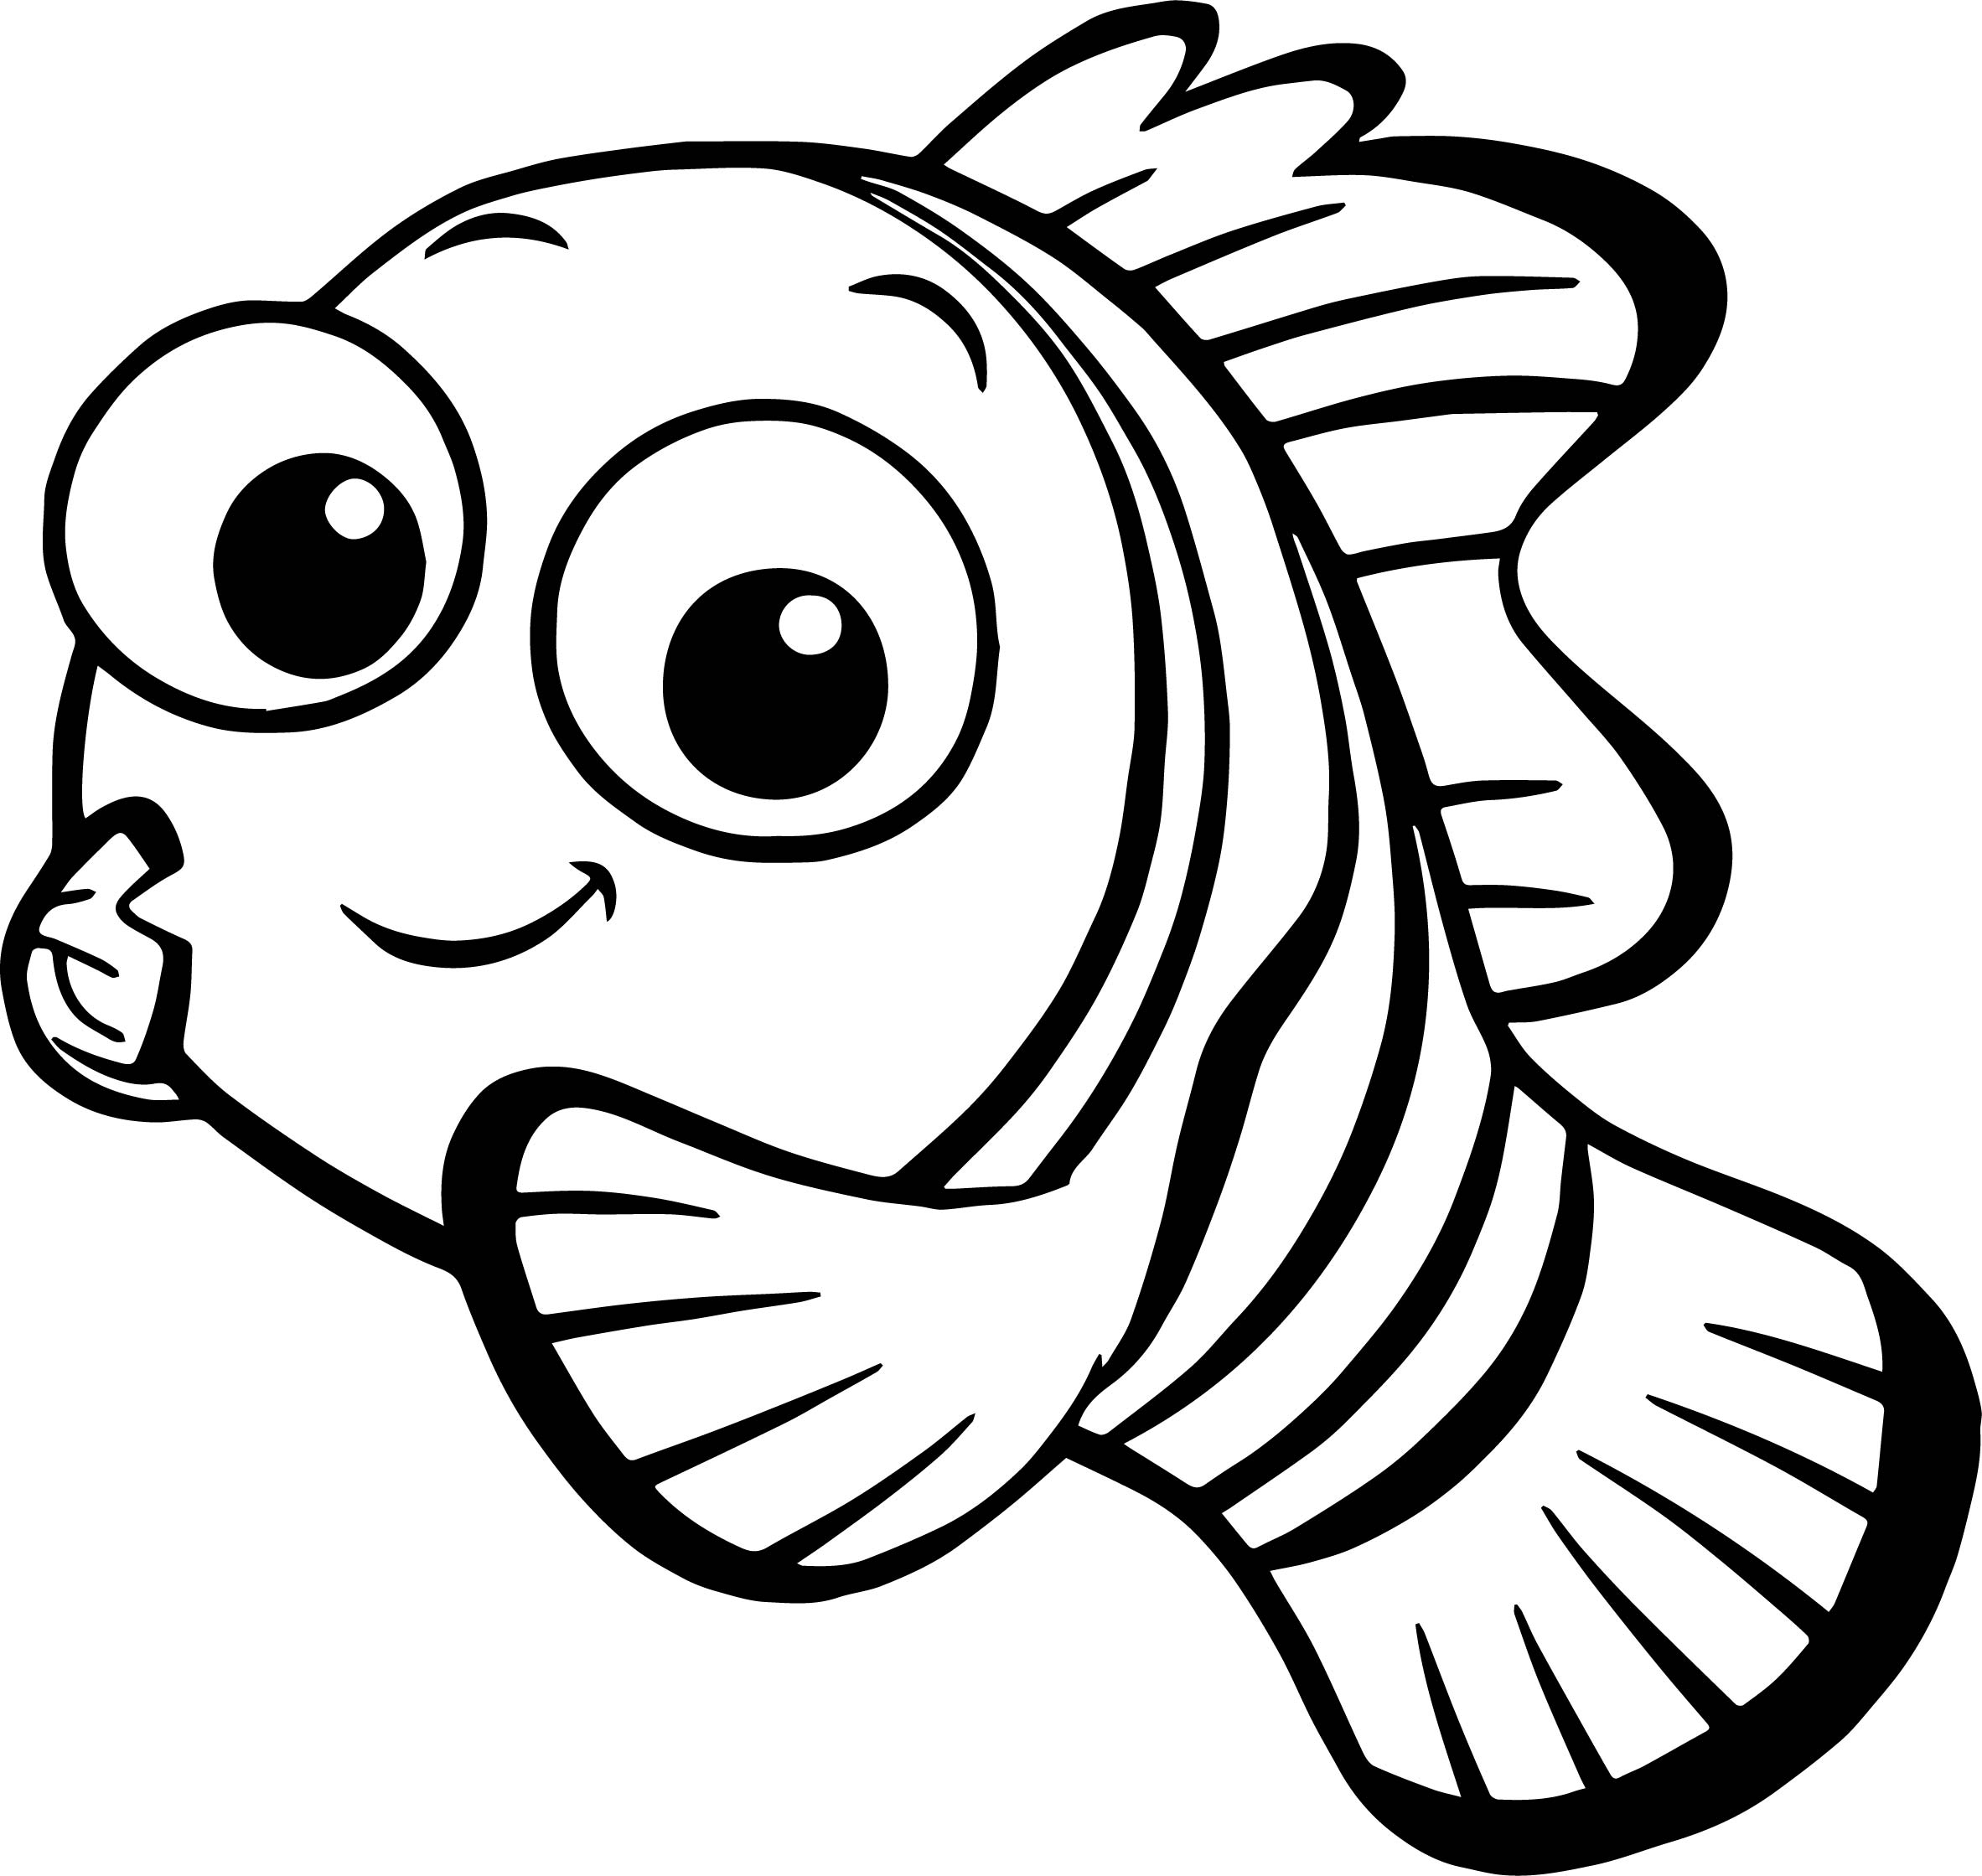 Disney Finding Nemo Coloring Pages at GetColorings.com ...